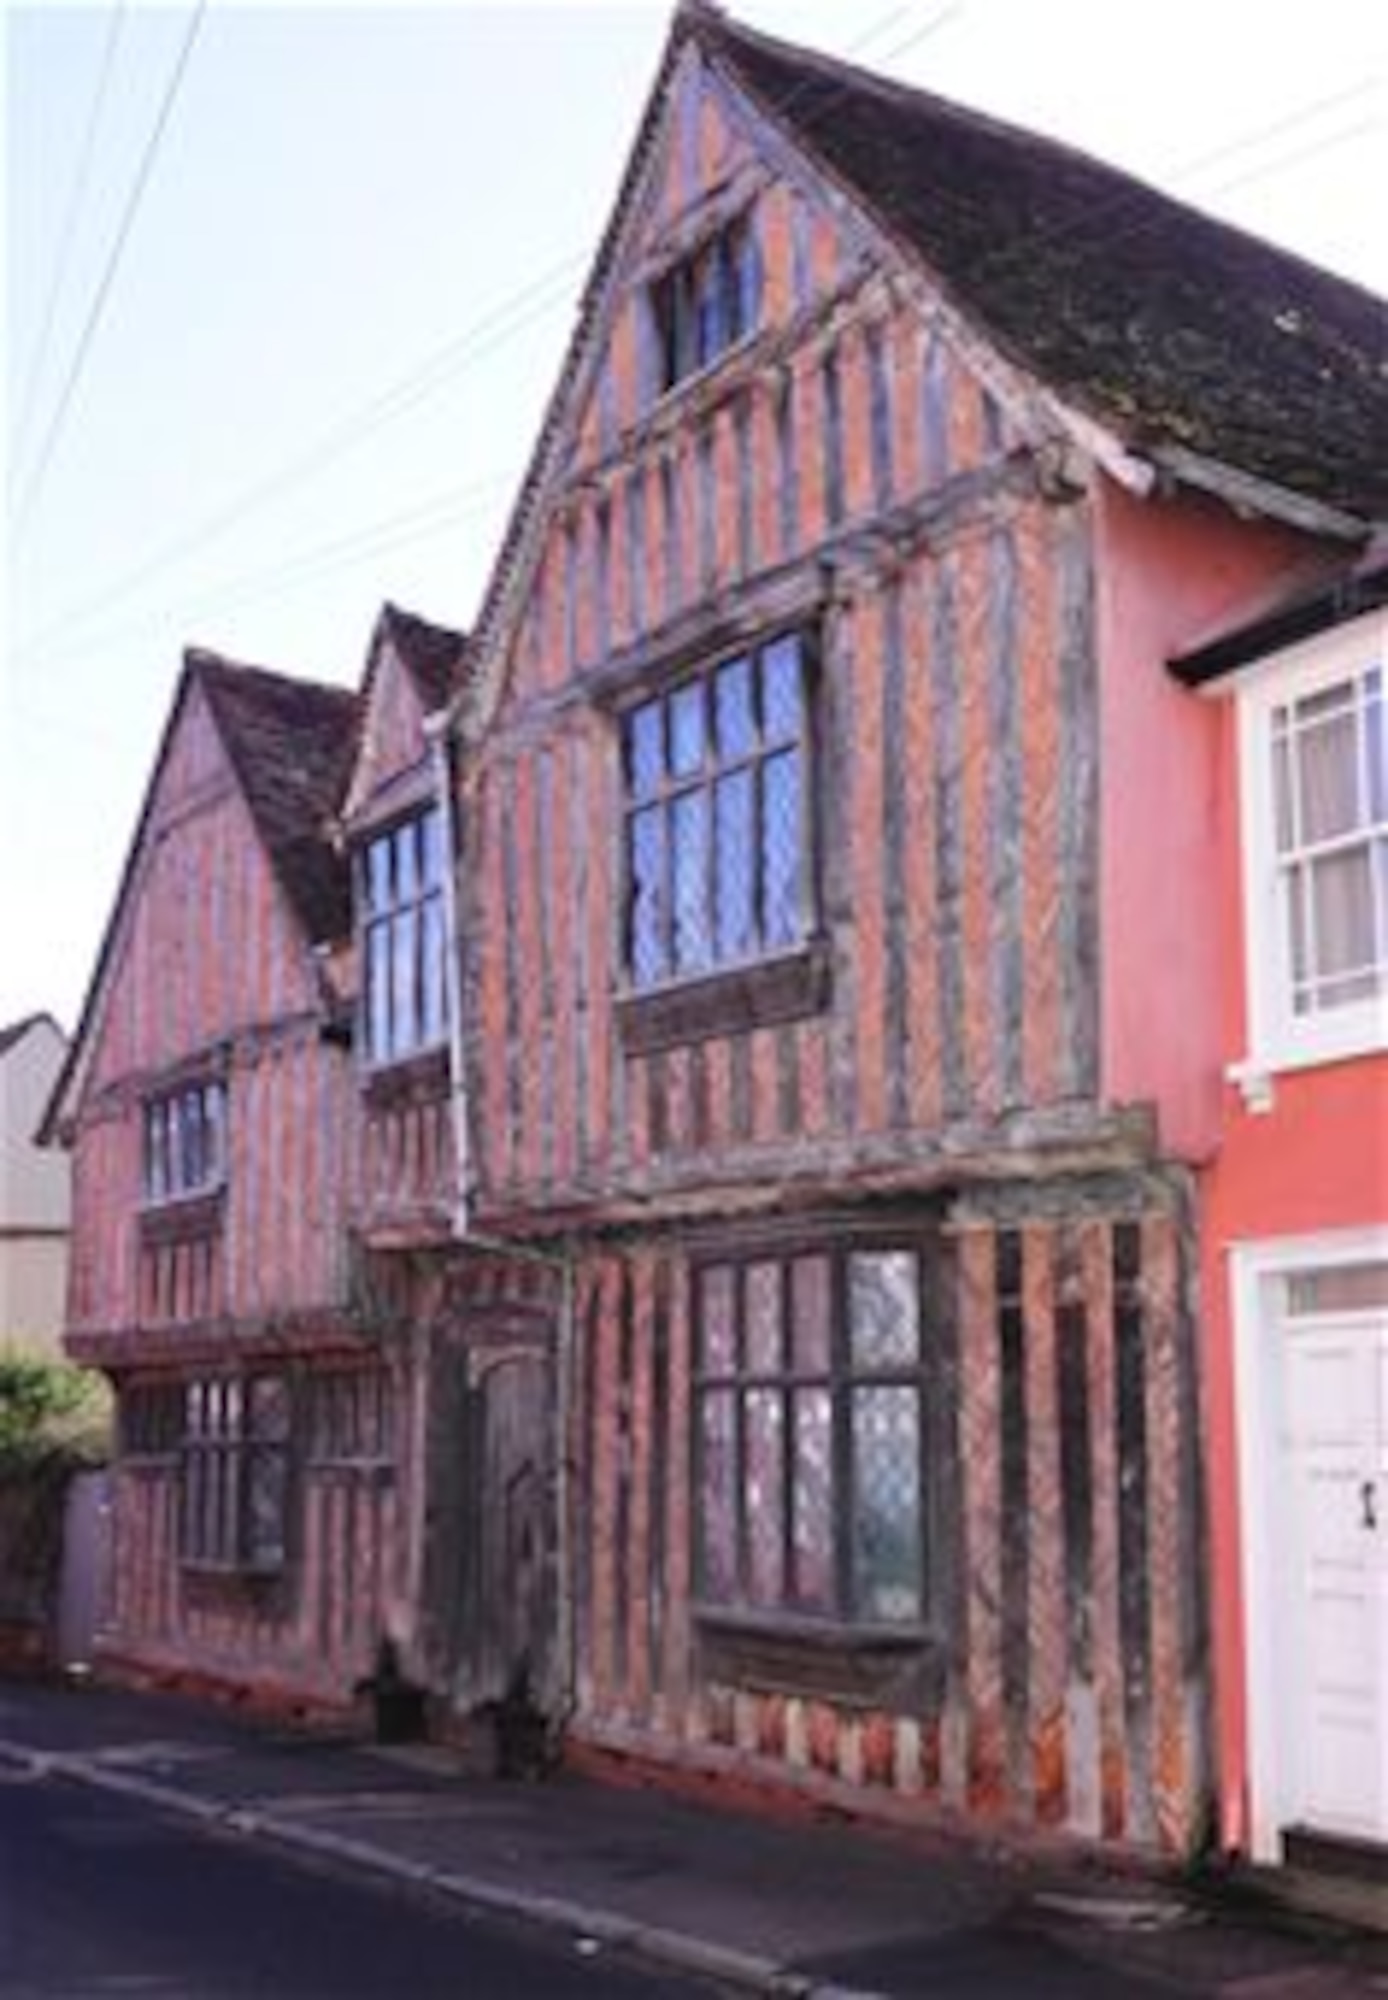 De Vere House in Lavenham, Suffolk, is located on Water Street. Moviemakers used this house to create the fictional village of "Godric's Hollow" in "Harry Potter and the Deathly Hallows, Part 1." They captured many photos over  a period of two years, and featured the 14th-century cottage as part of the birthplace of both Harry Potter and his mentor and headmaster, Albus Dumbledore. (U.S. Air Force photo by Karen Abeyasekere/Released)